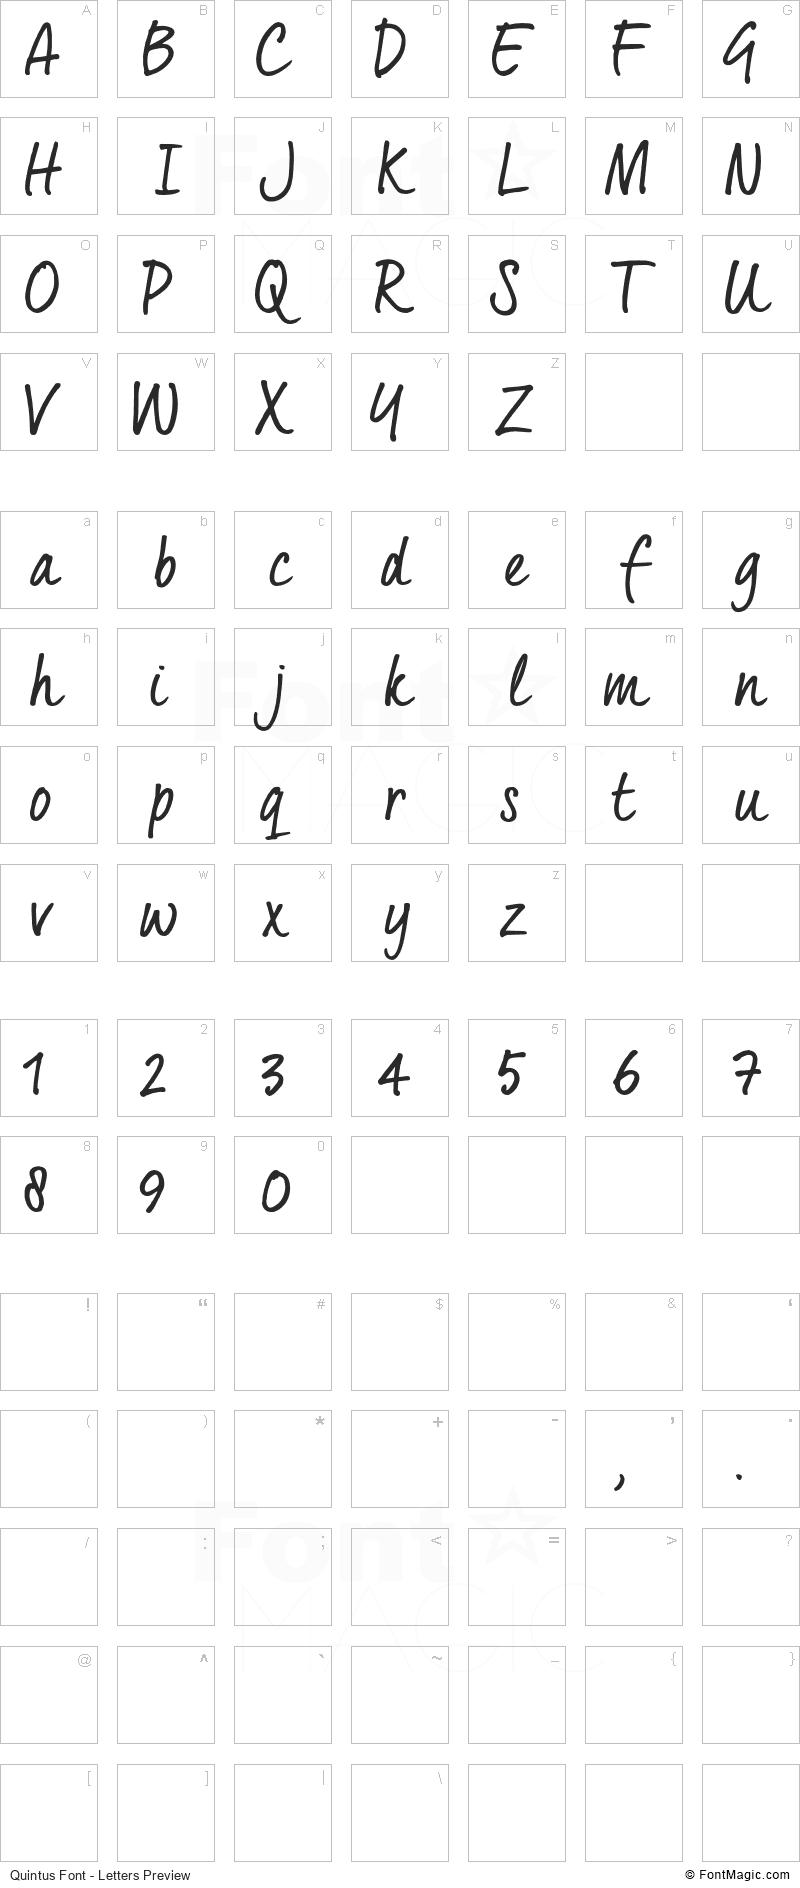 Quintus Font - All Latters Preview Chart